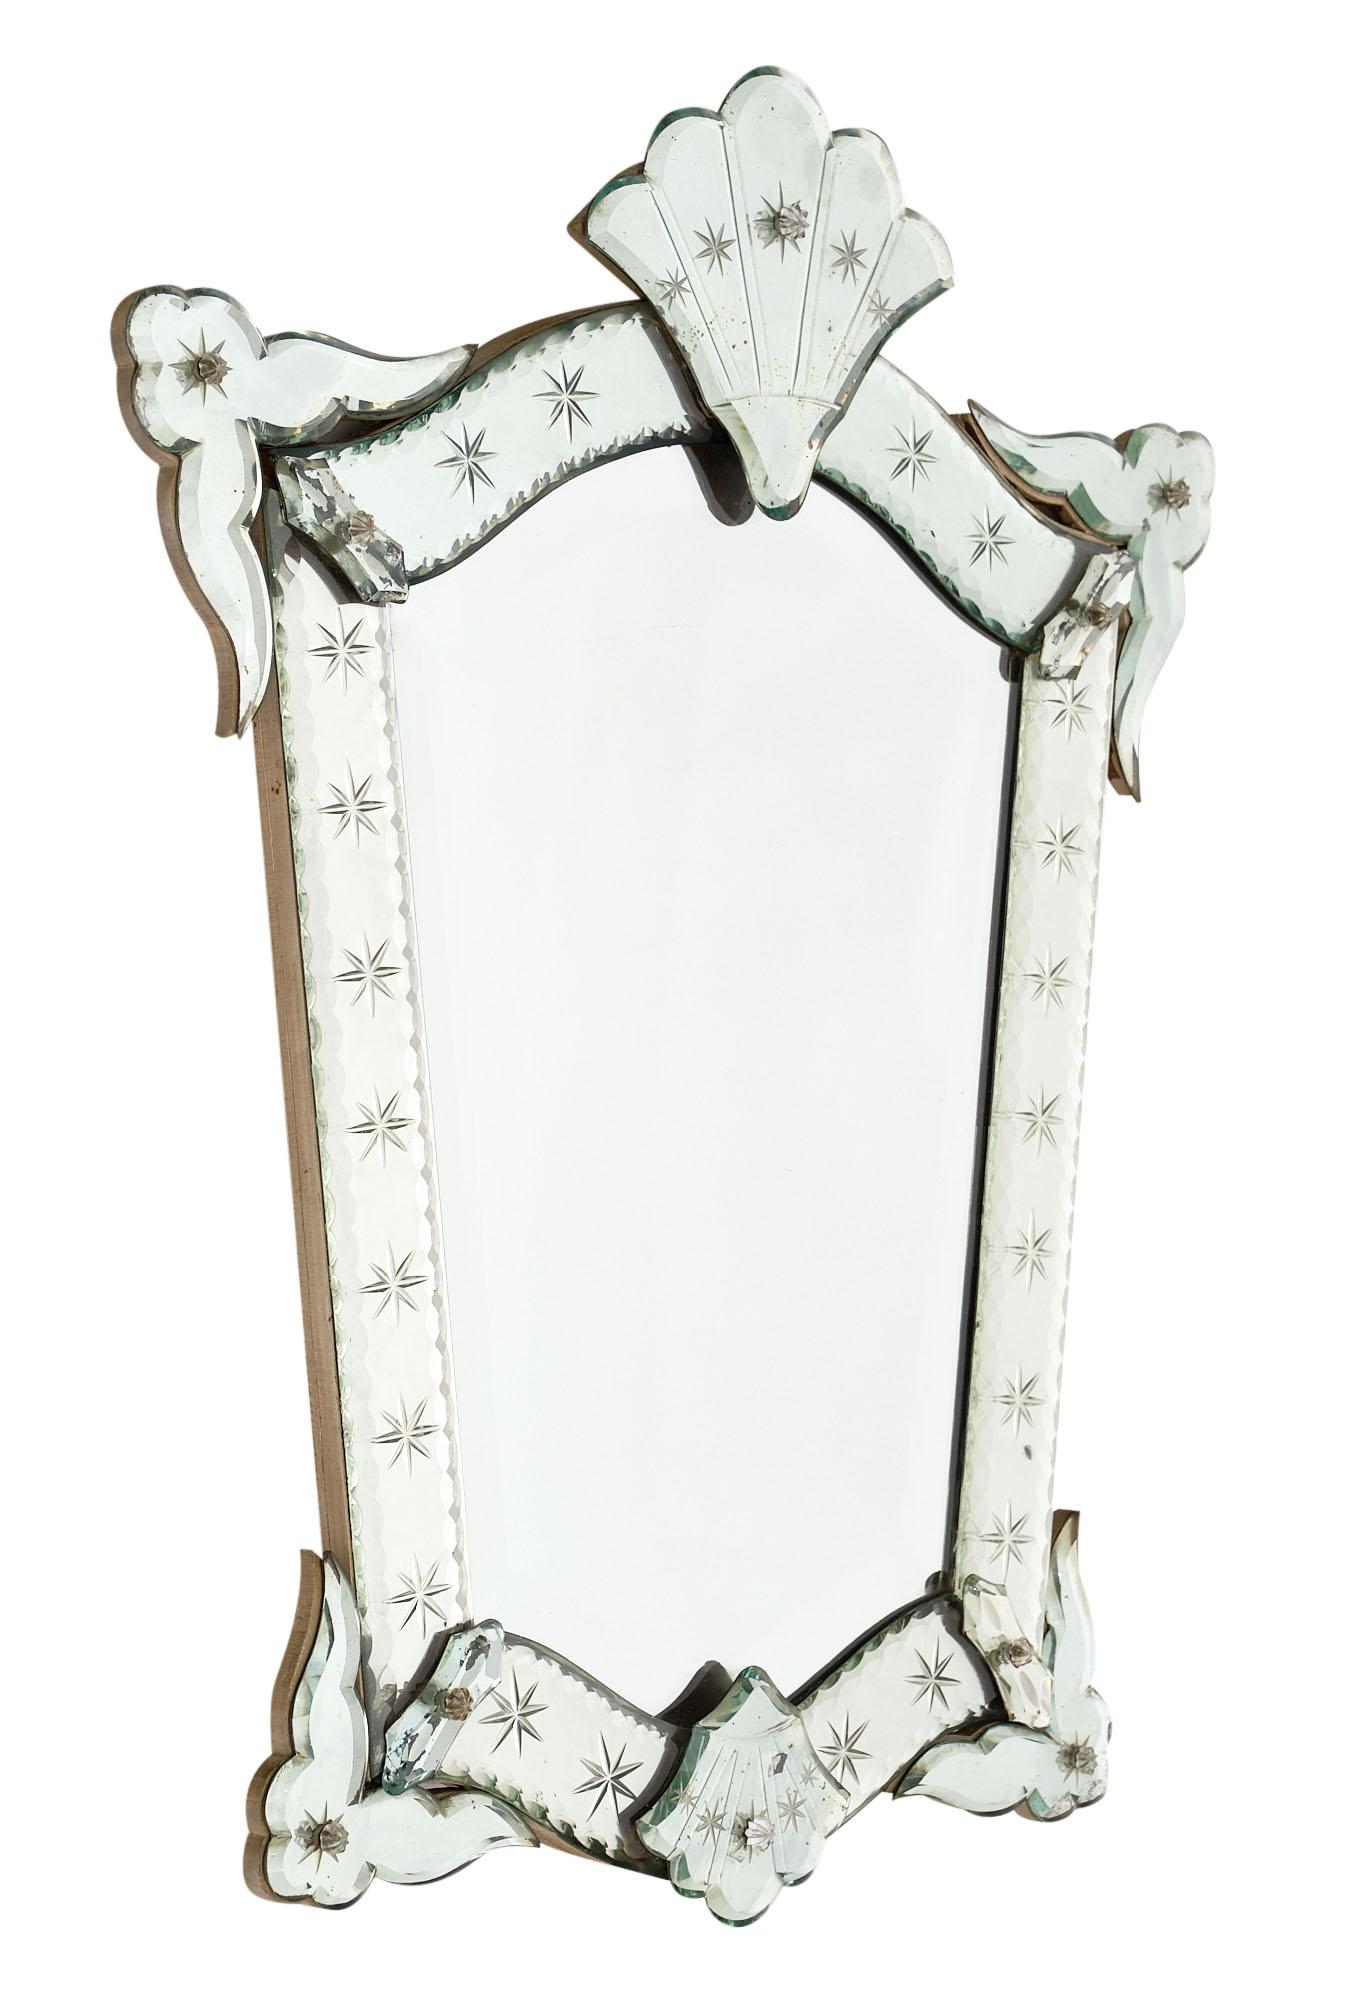 Petite antique Venetian mirror in pristine antique condition. We love the decor of stars engraves on the frame and the scalloped fronton.